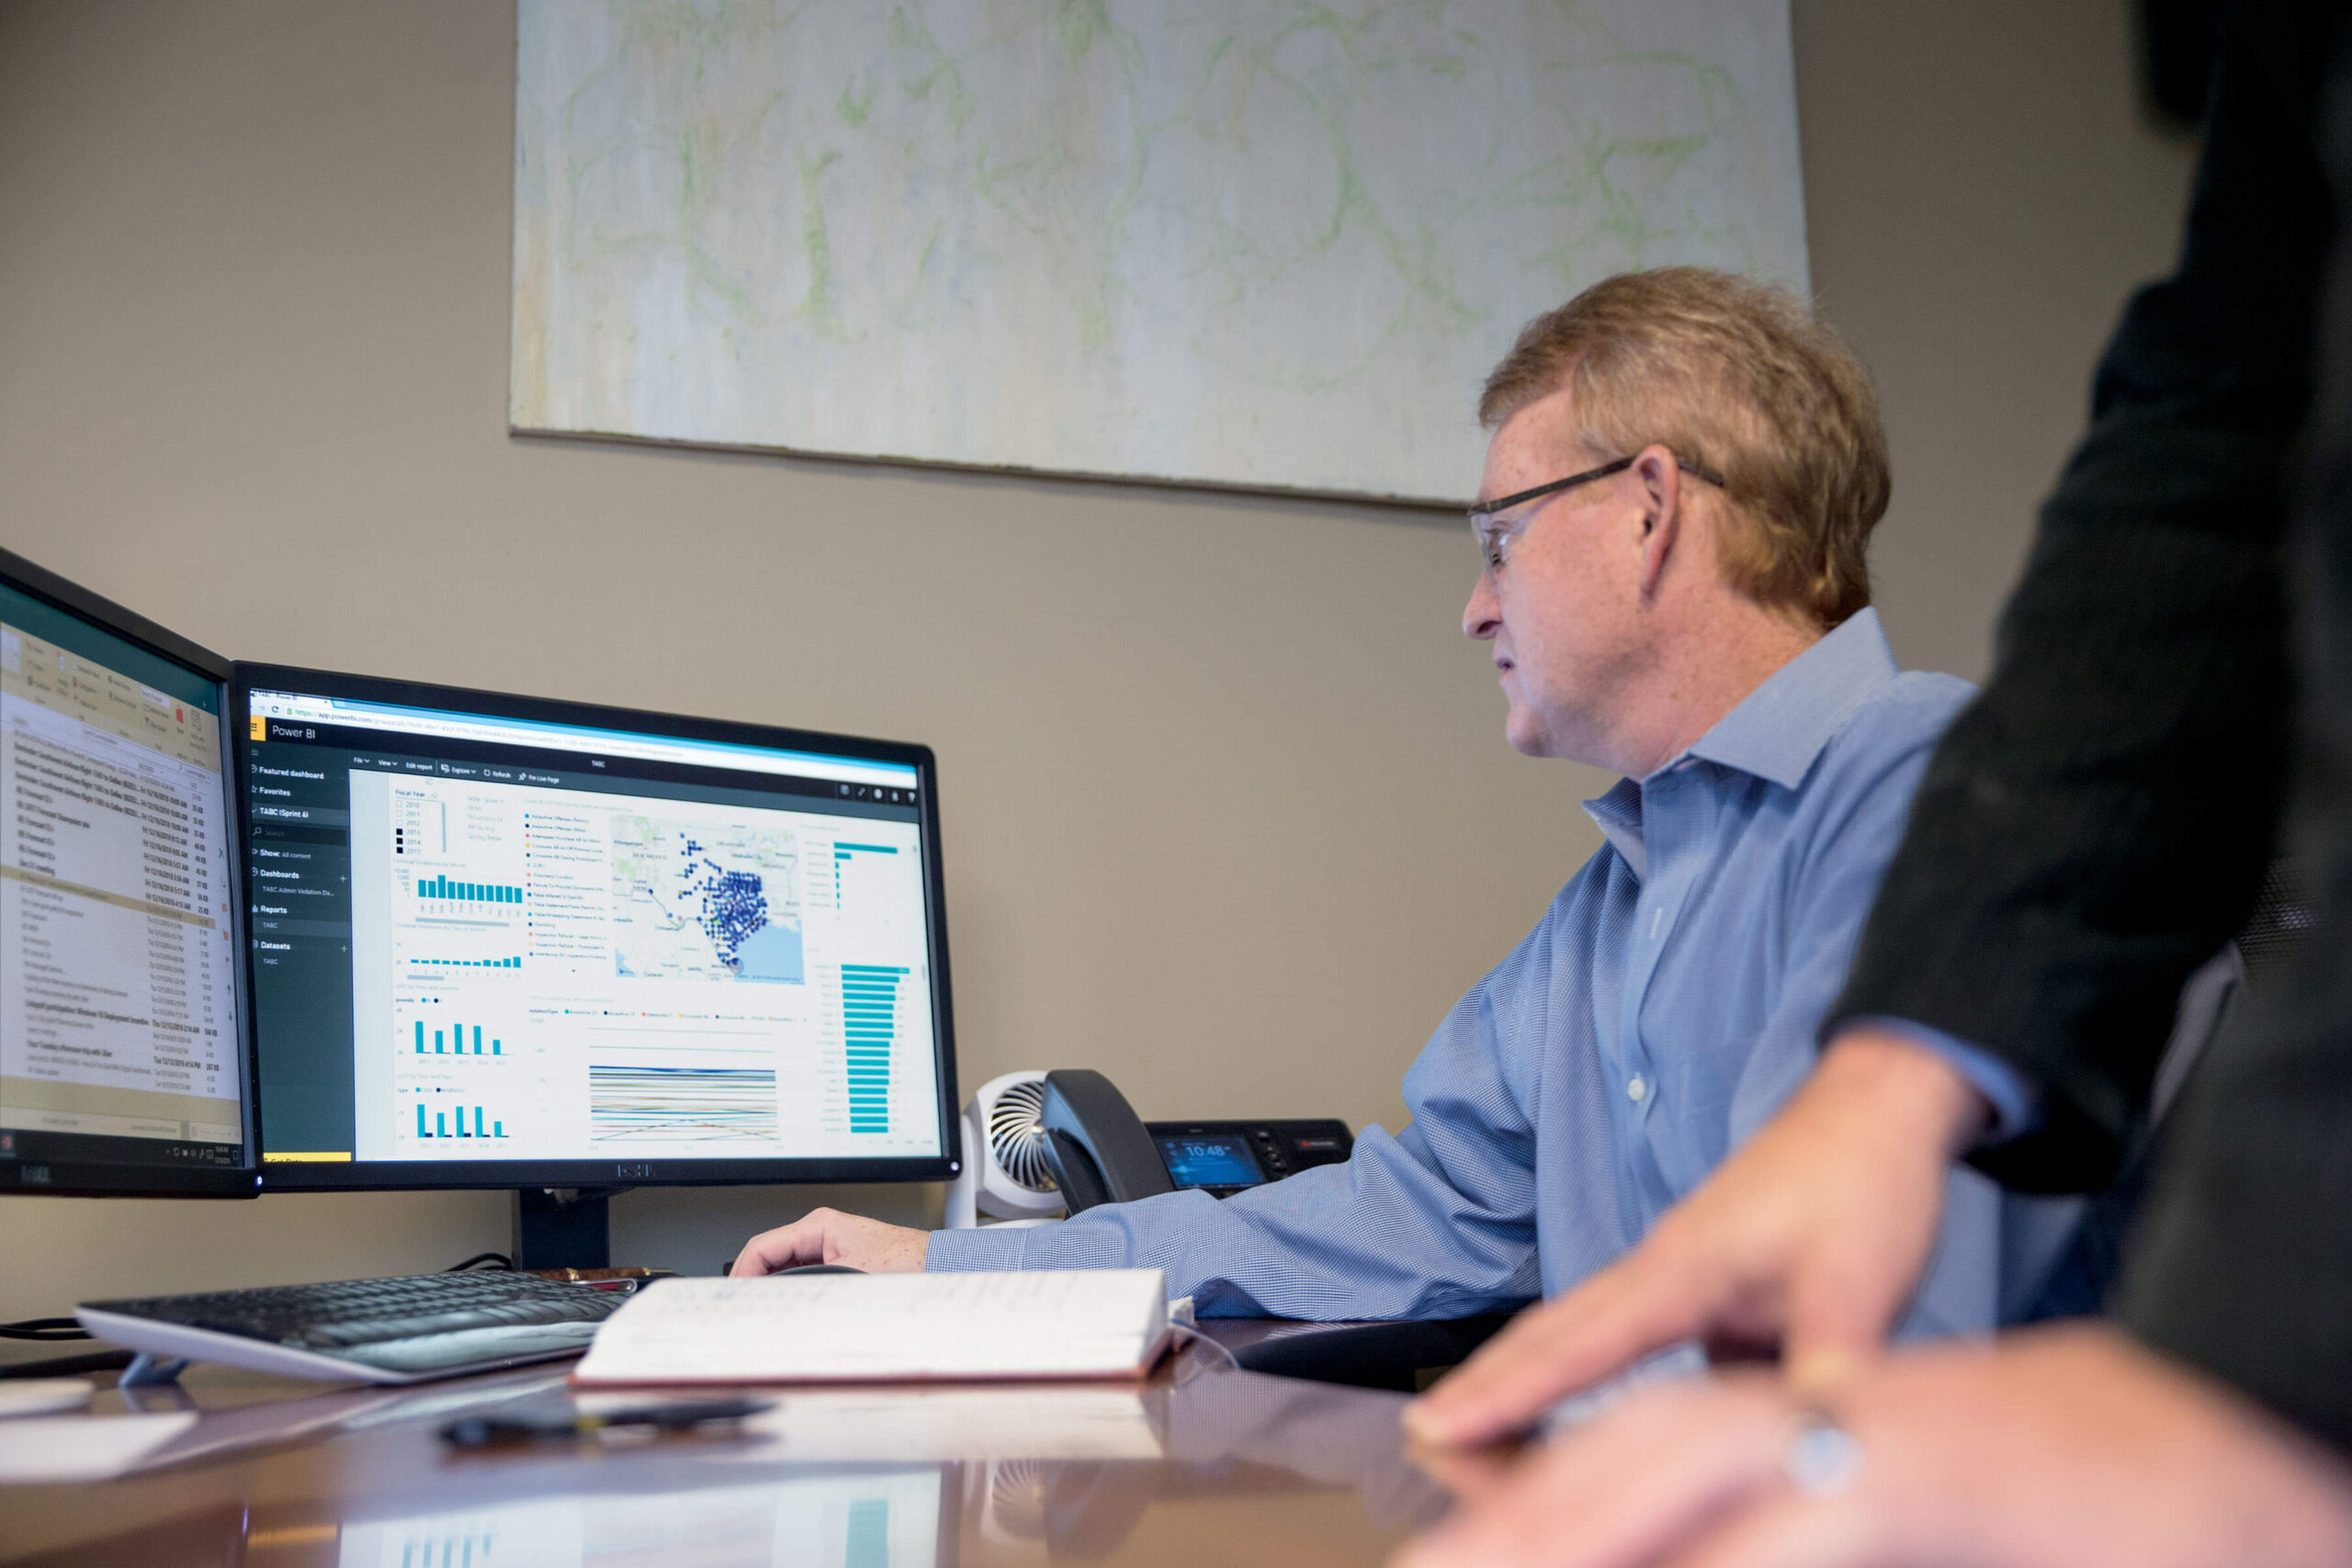 A Microsoft employee works on a Power BI dashboard displaying geographic information.